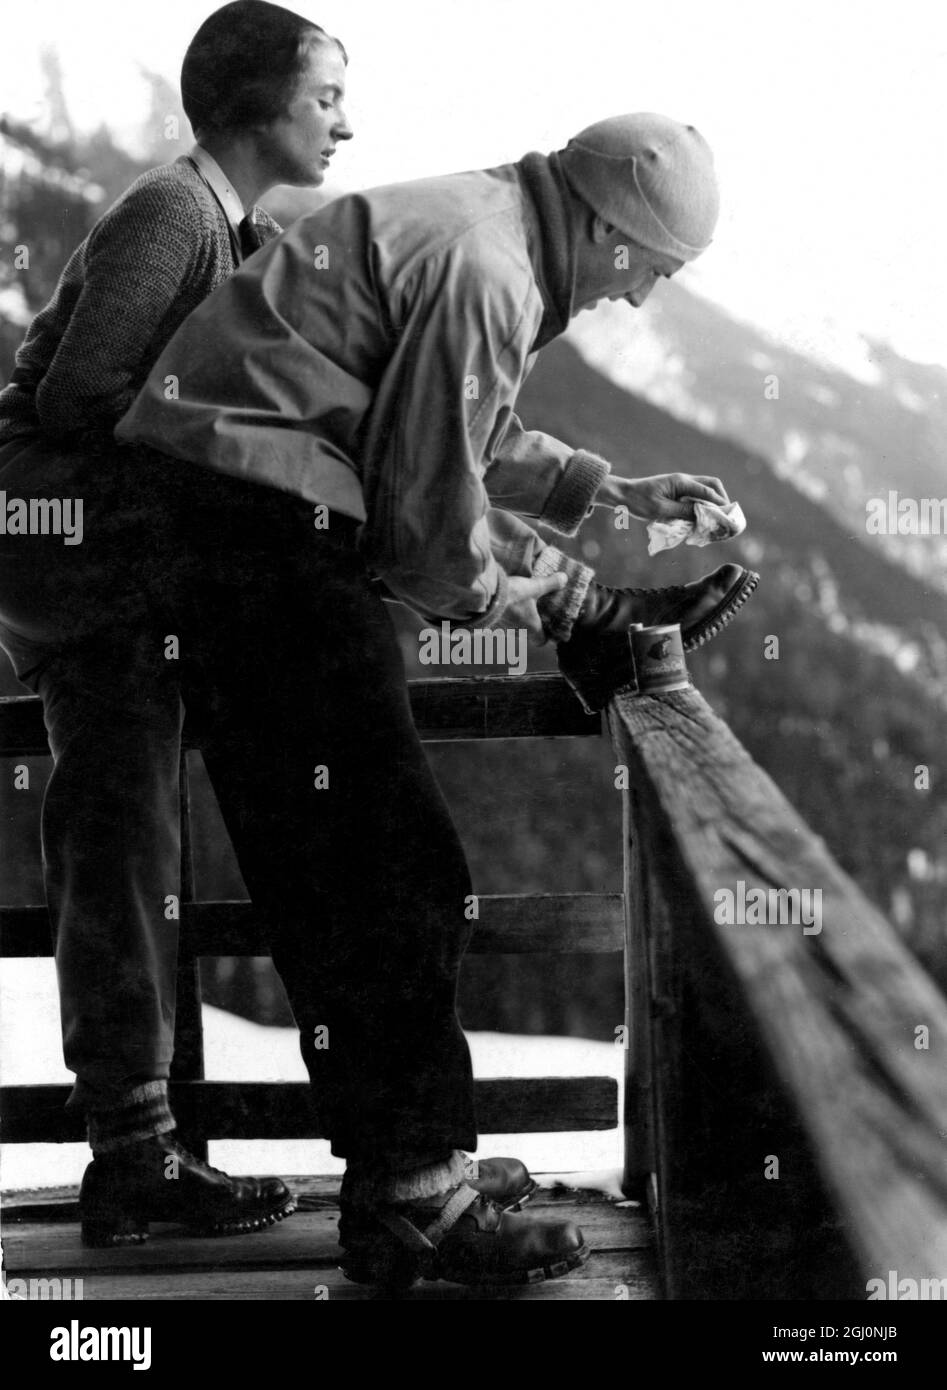 Grease is an important item in the mountaineer's equipment , these climbers are greasing their boots in preparation for the day's climb Stock Photo